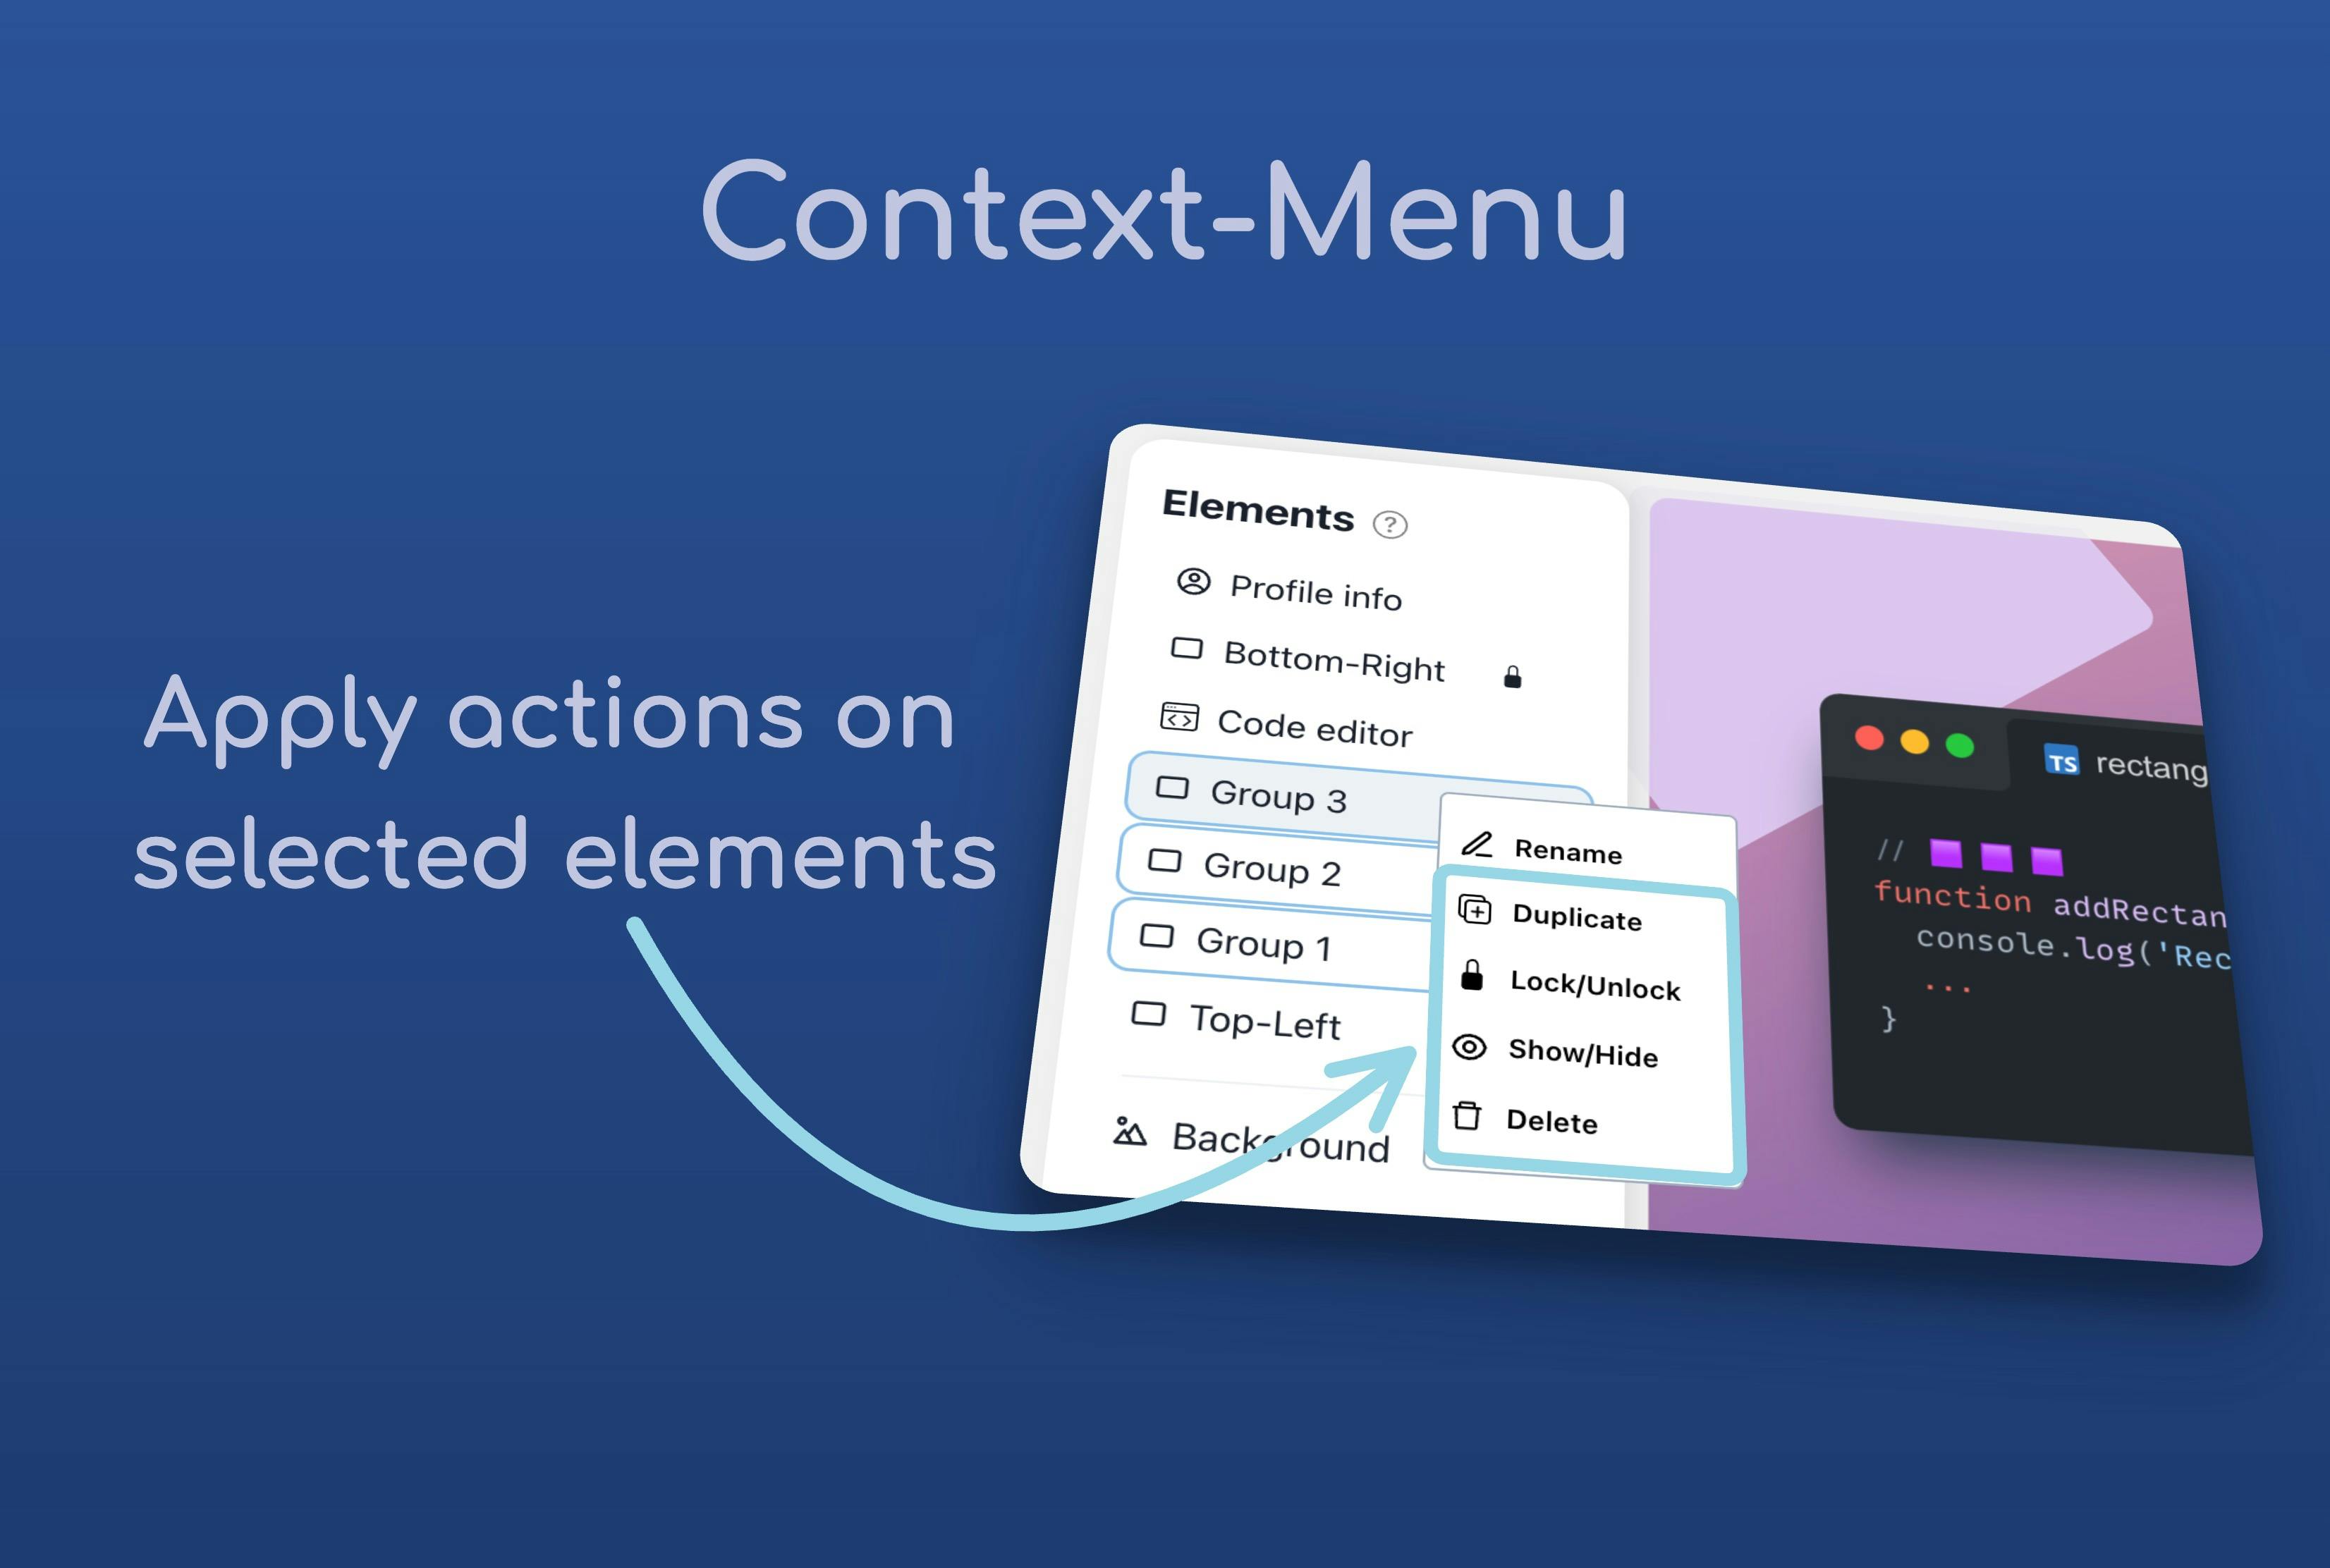 Promotion Image showcasing the new context menu